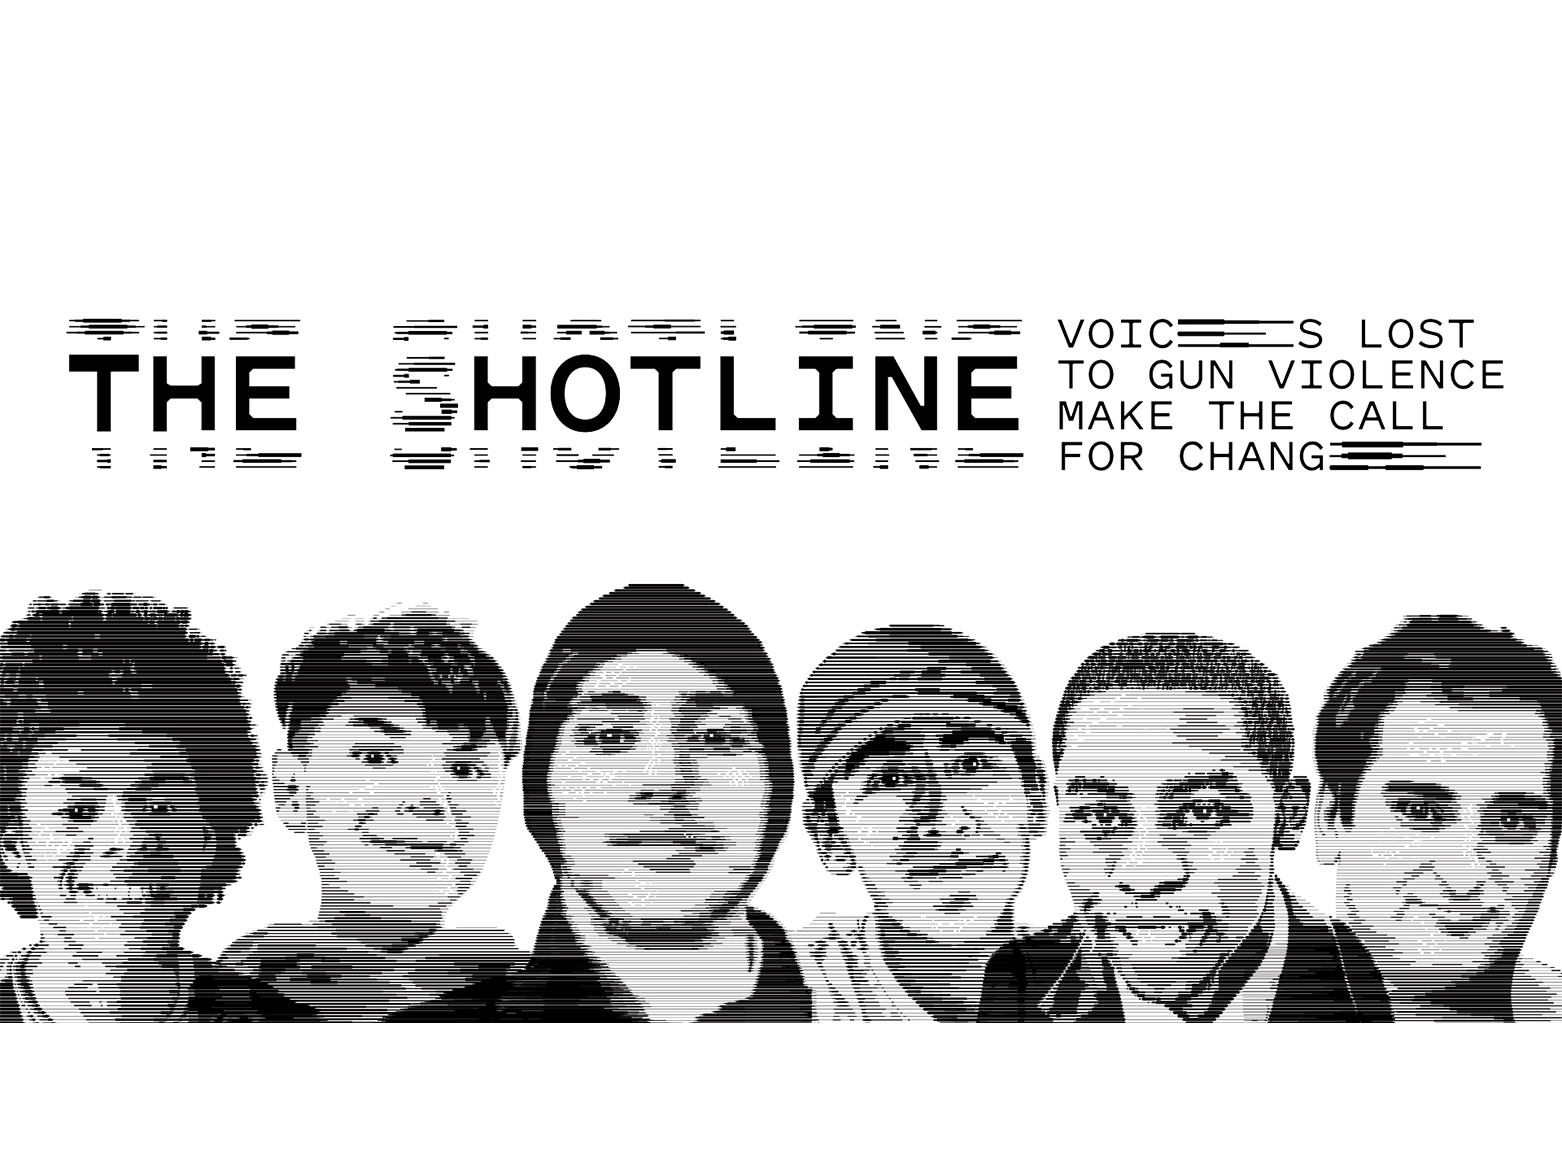 The Shotline Hero Image with Victim's Faces Illustrated